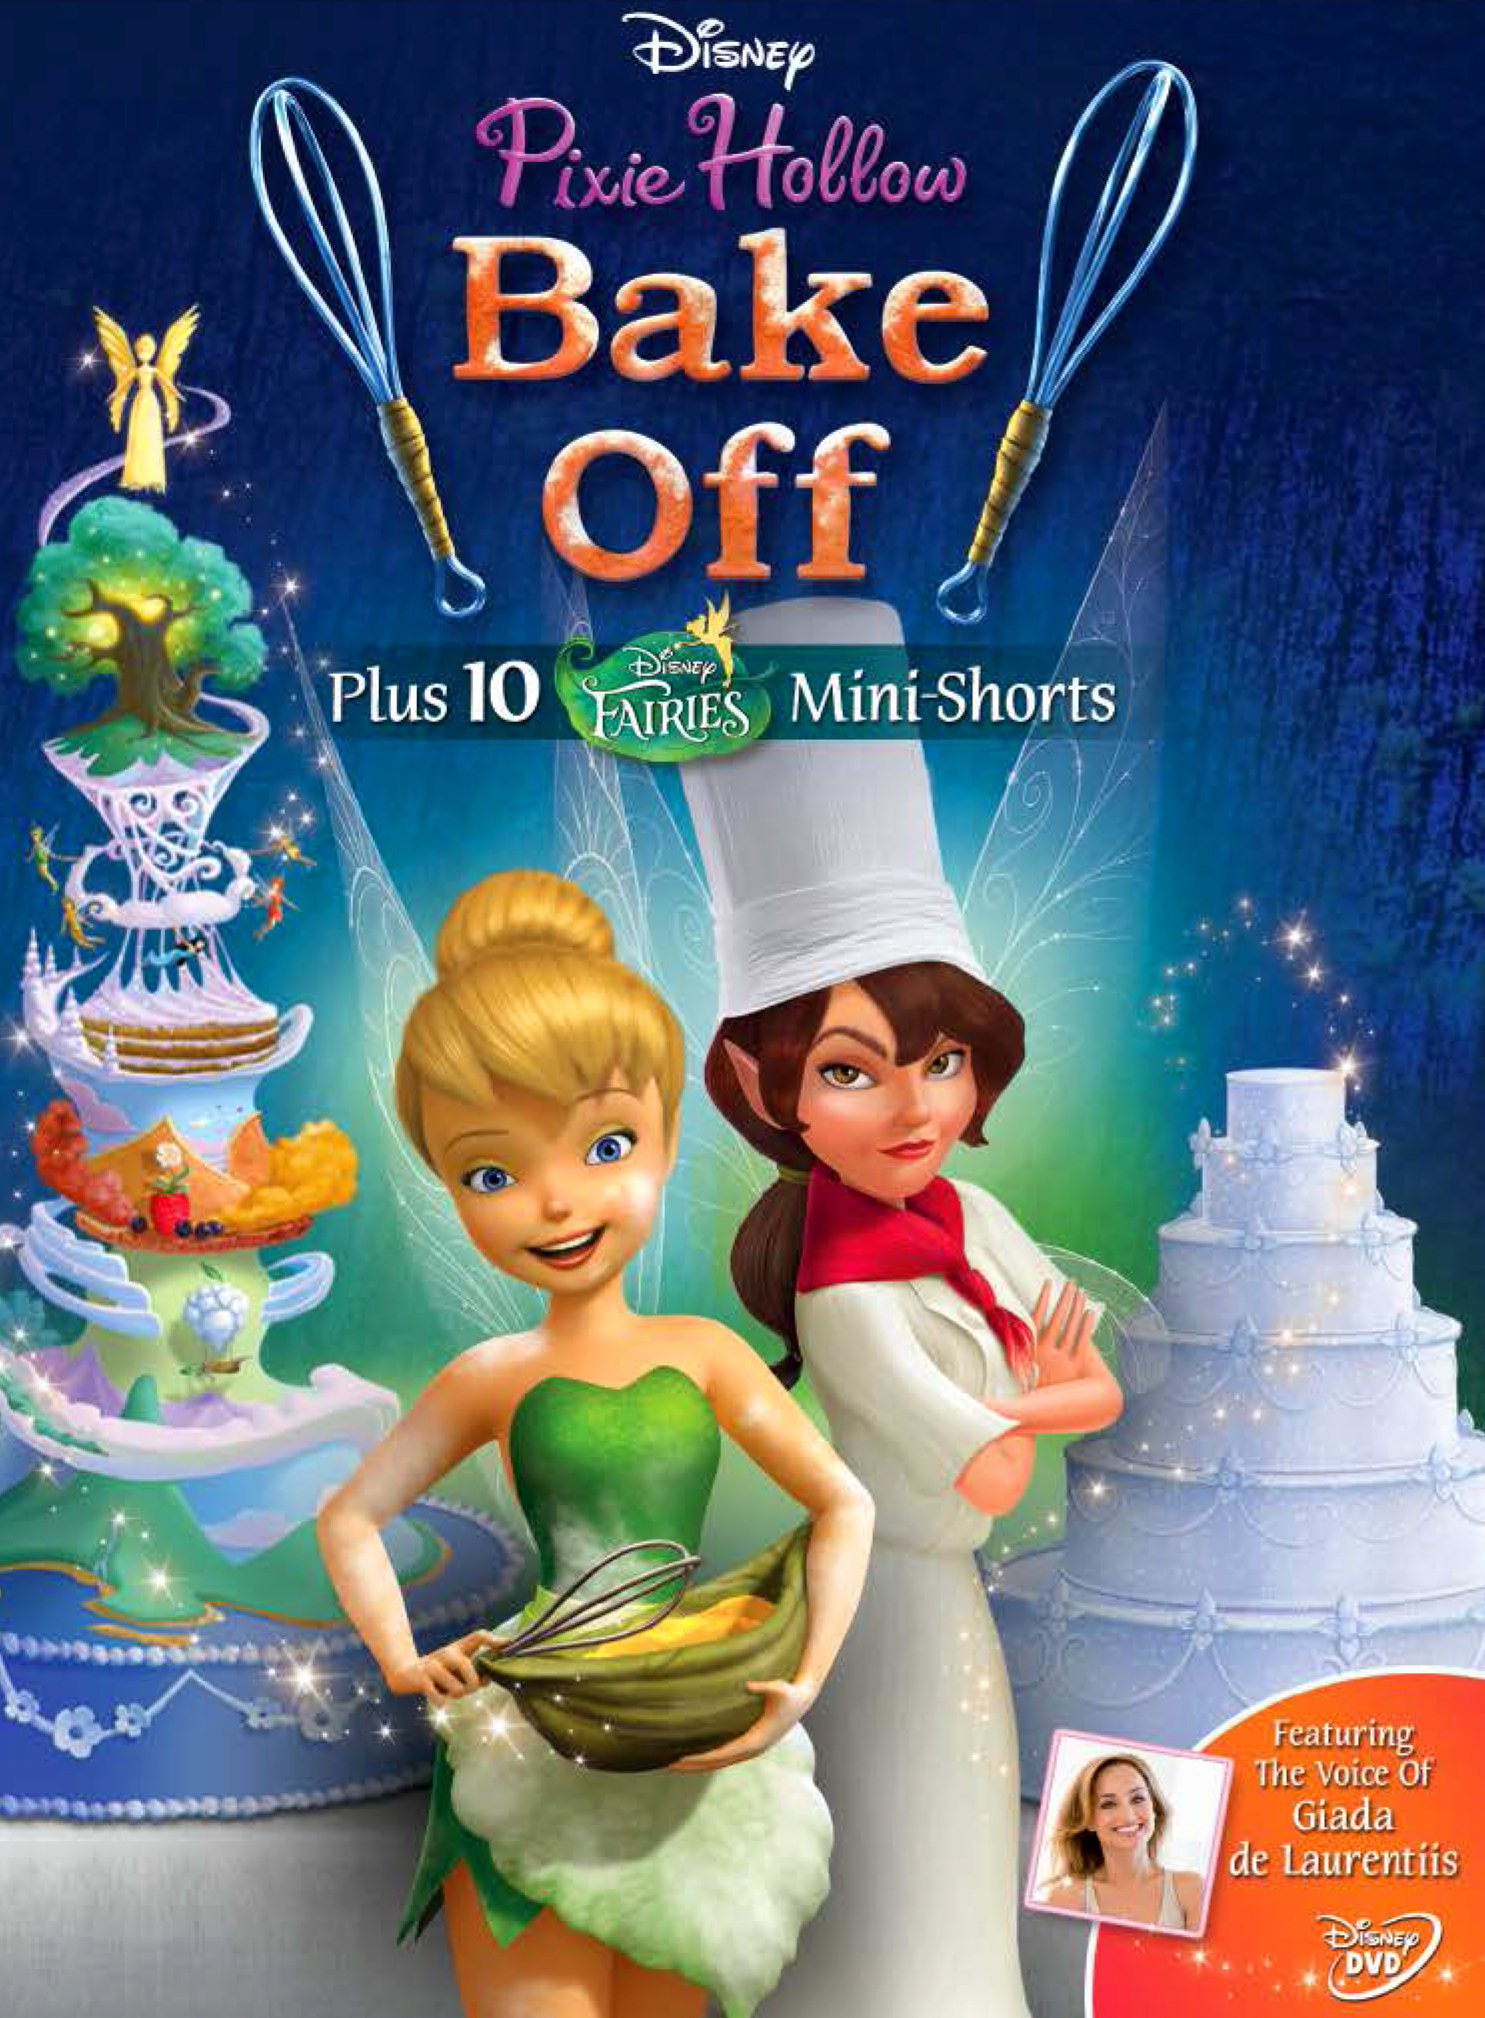 Pixie hollow bake off yts